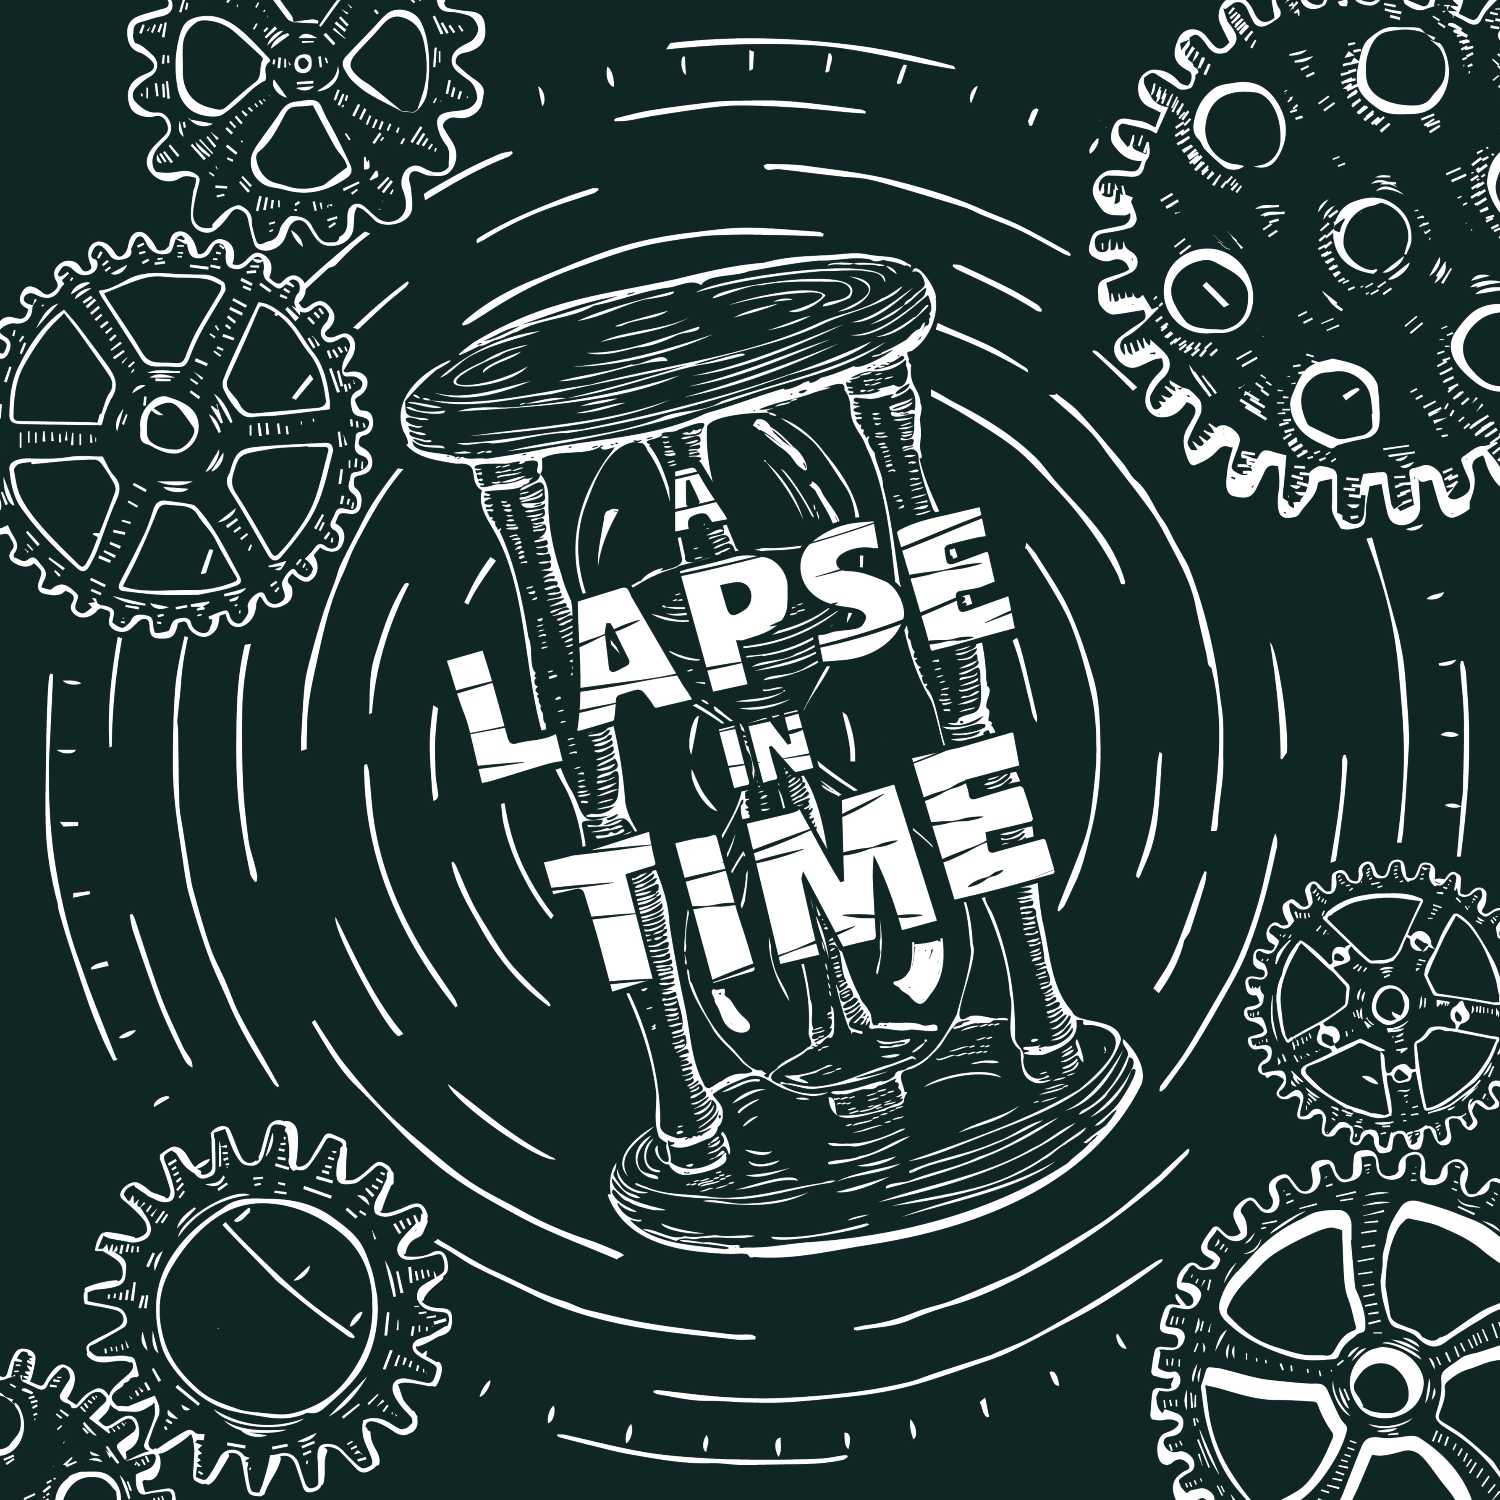 A Lapse In Time